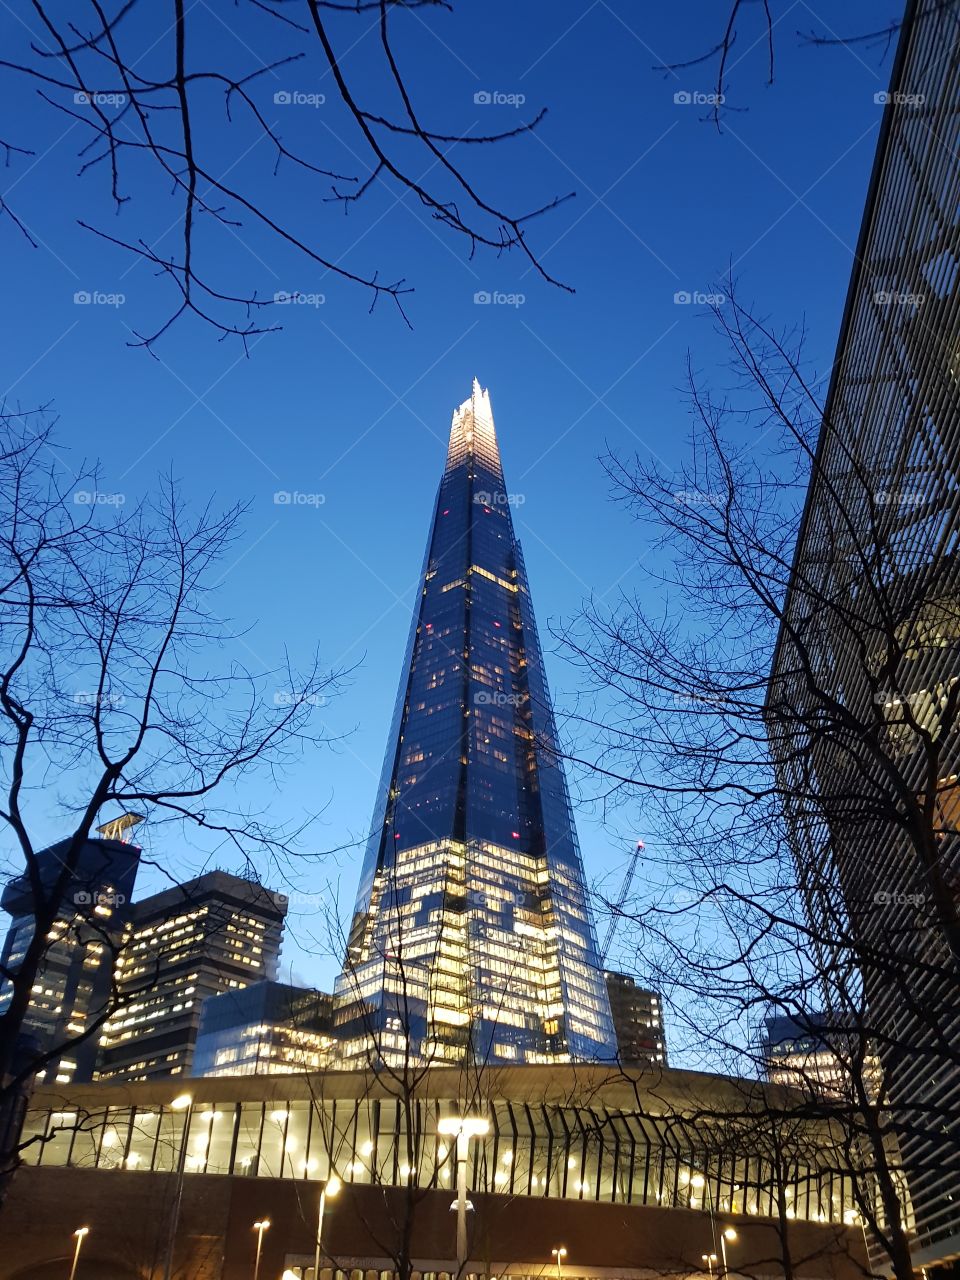 The Shard skyscraper is the tallest building in the UK. Here it is illuminated on a winter evening.